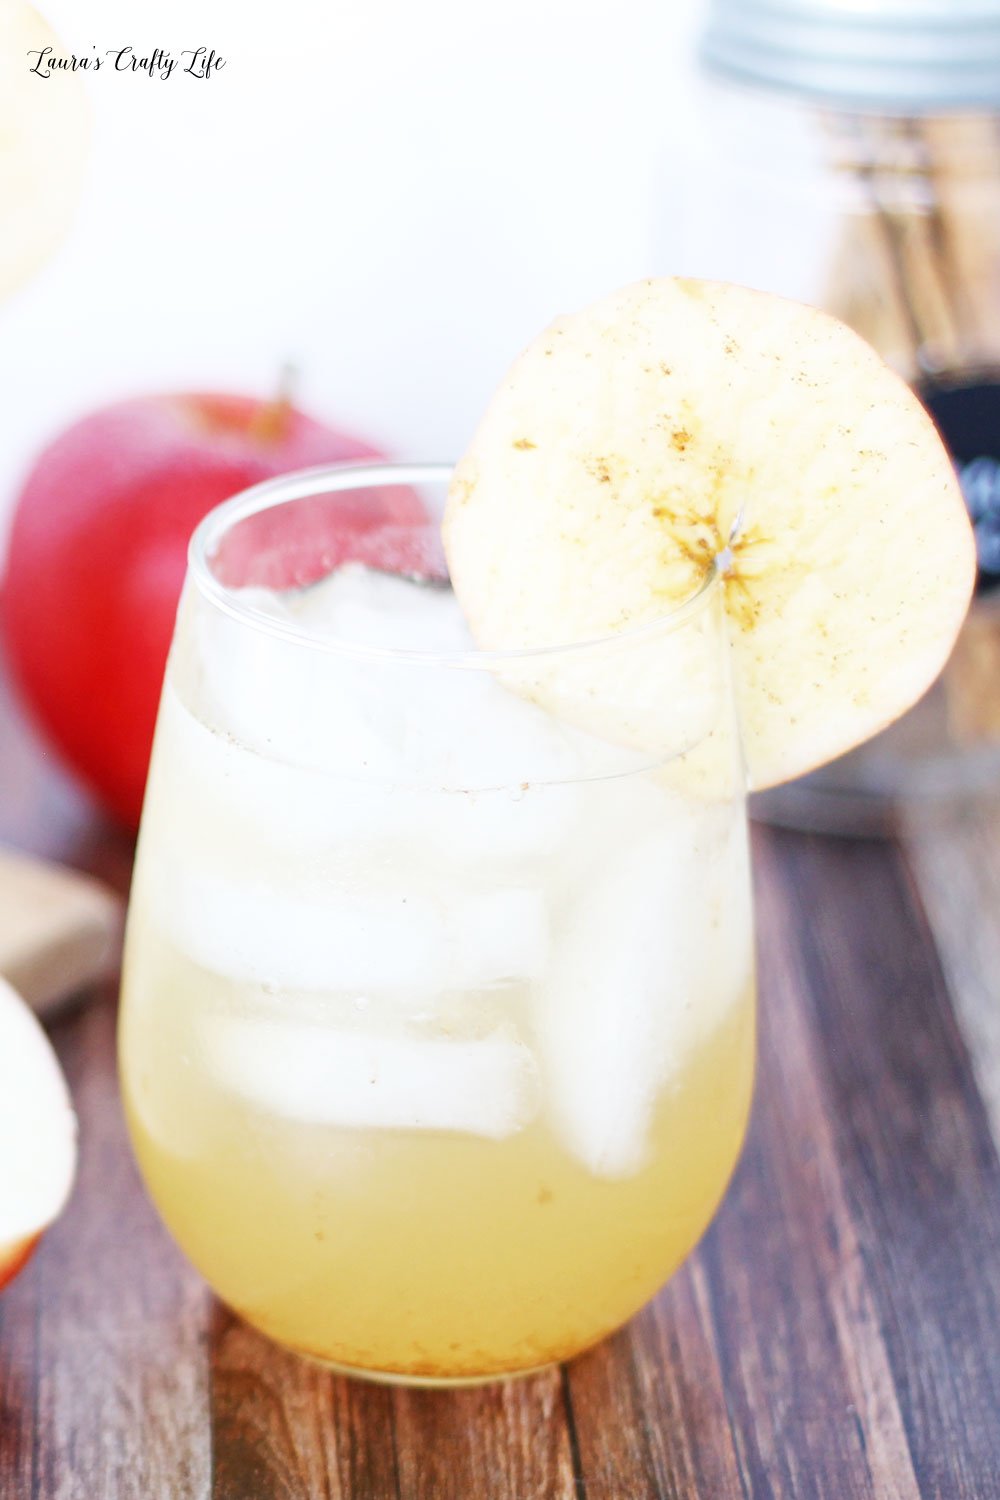 Sparkling apple cider punch recipe - the perfect fall punch recipe for Halloween parties and Thanksgiving dinner. #laurascraftylife #punchrecipe #fall #applecider